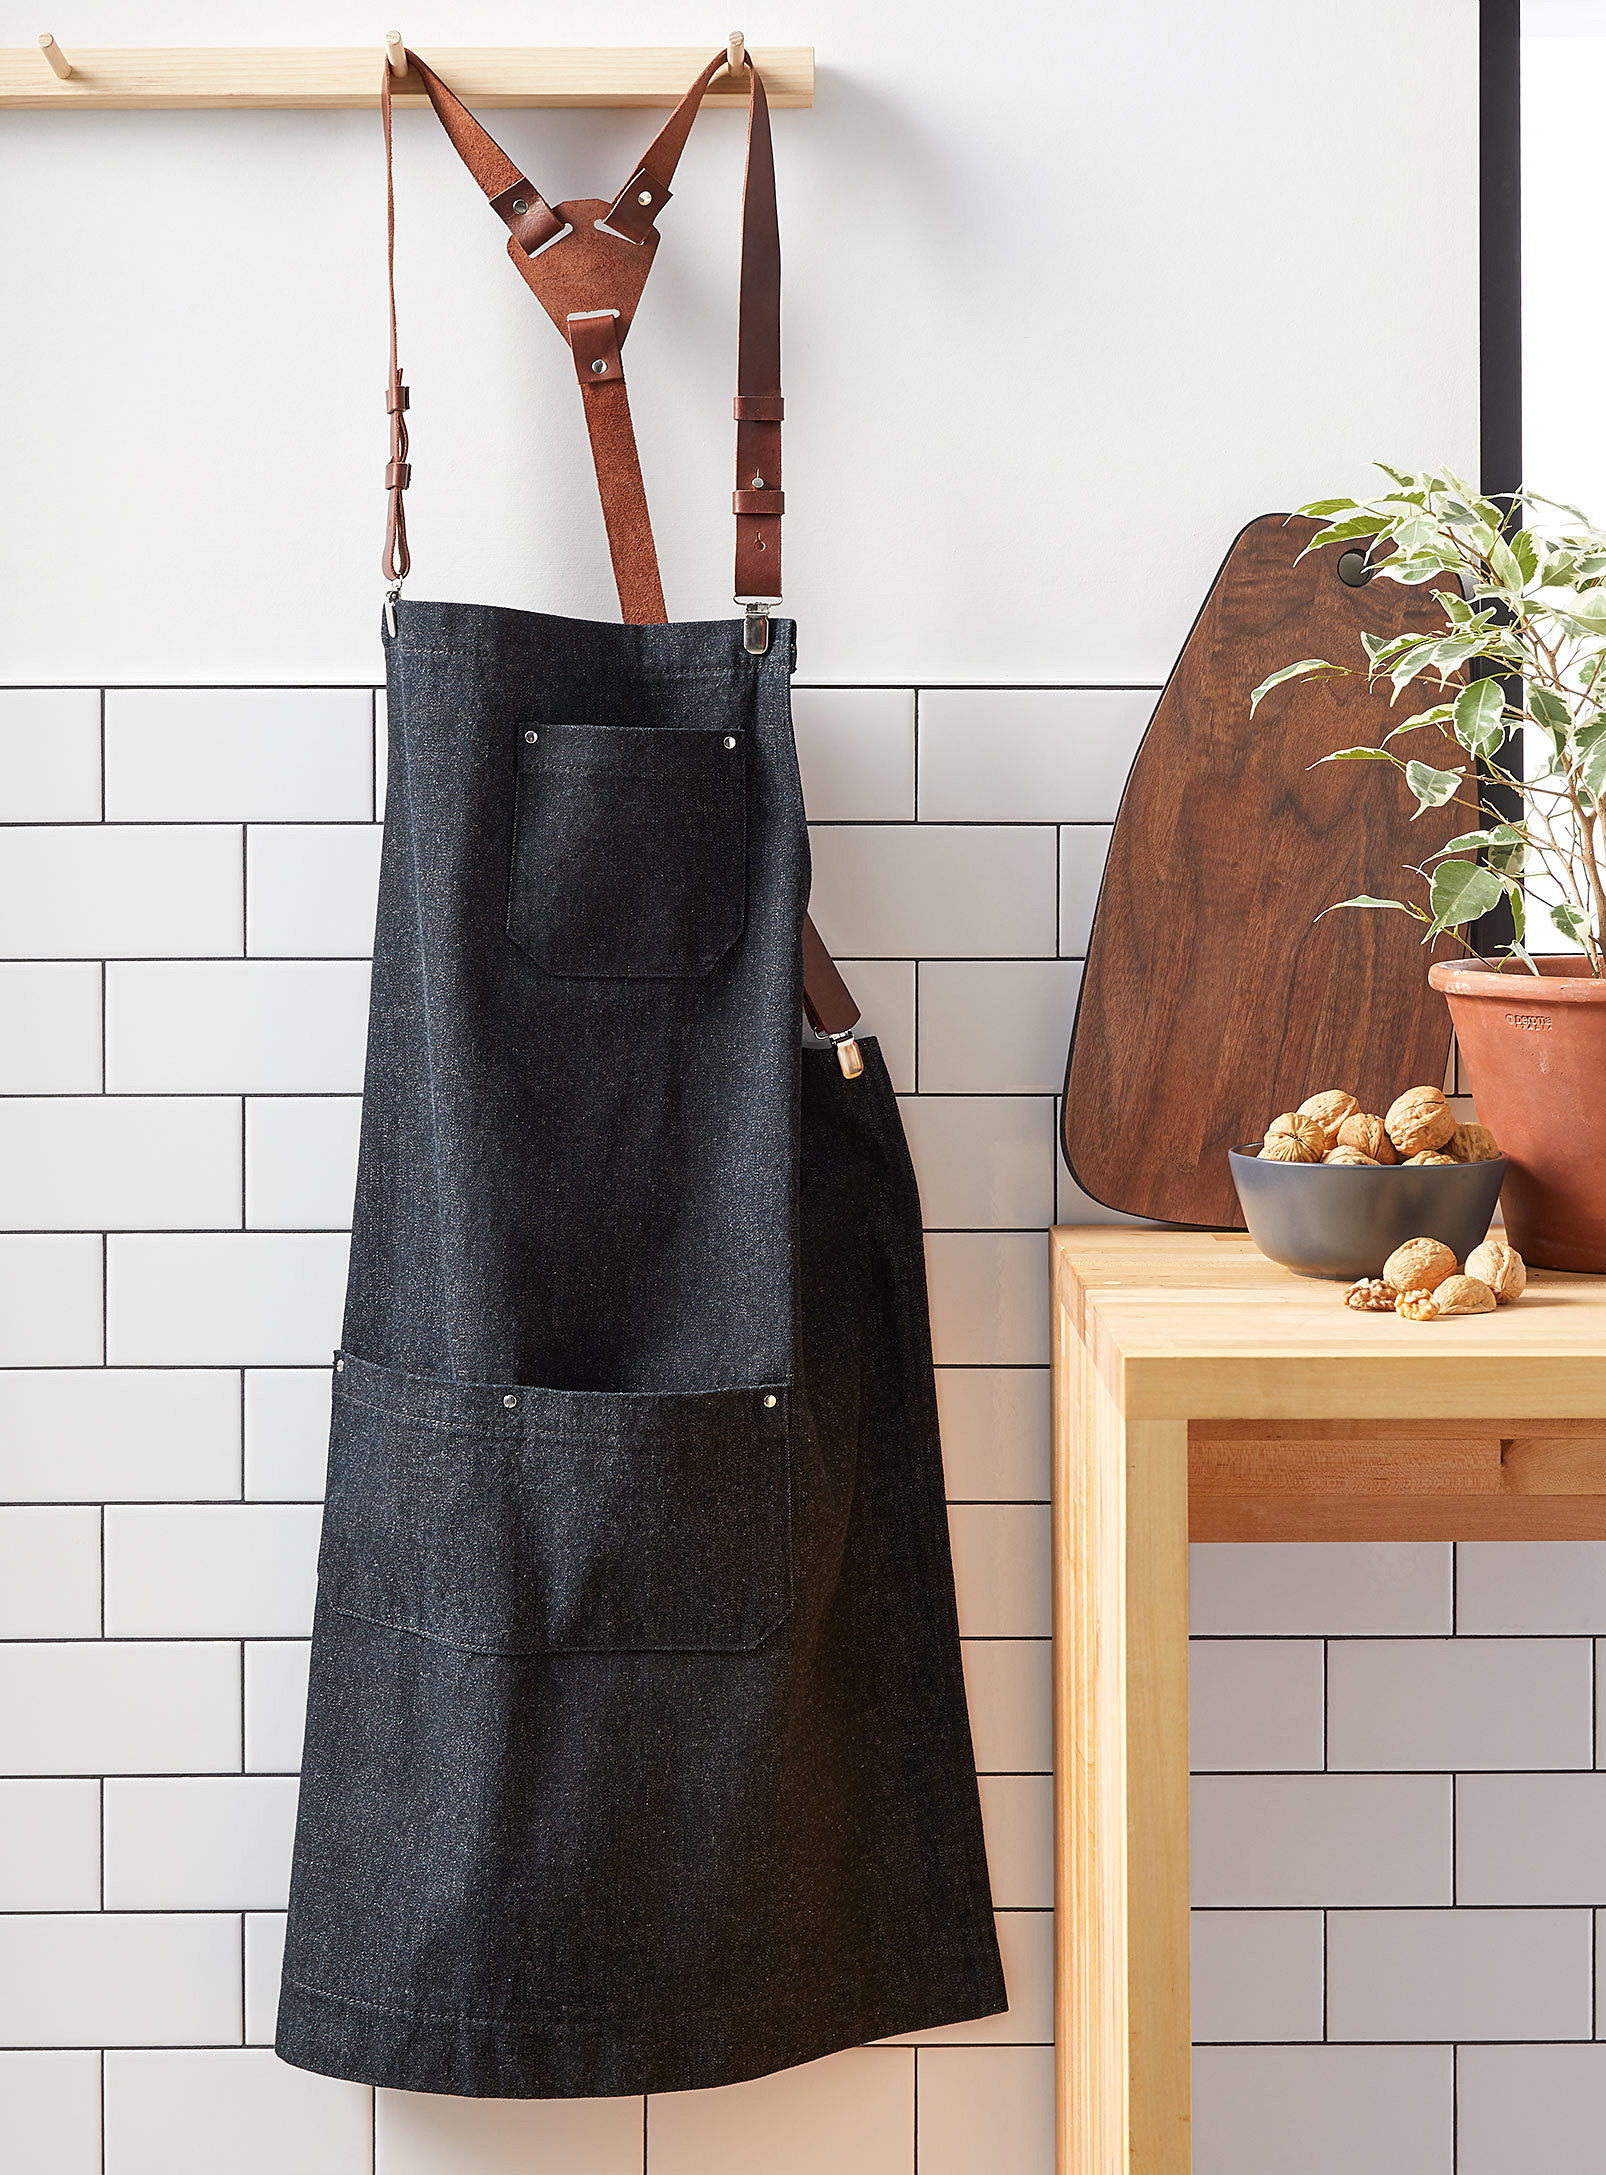 Atelier Chalet Denim And Leather Apron In Marine Blue